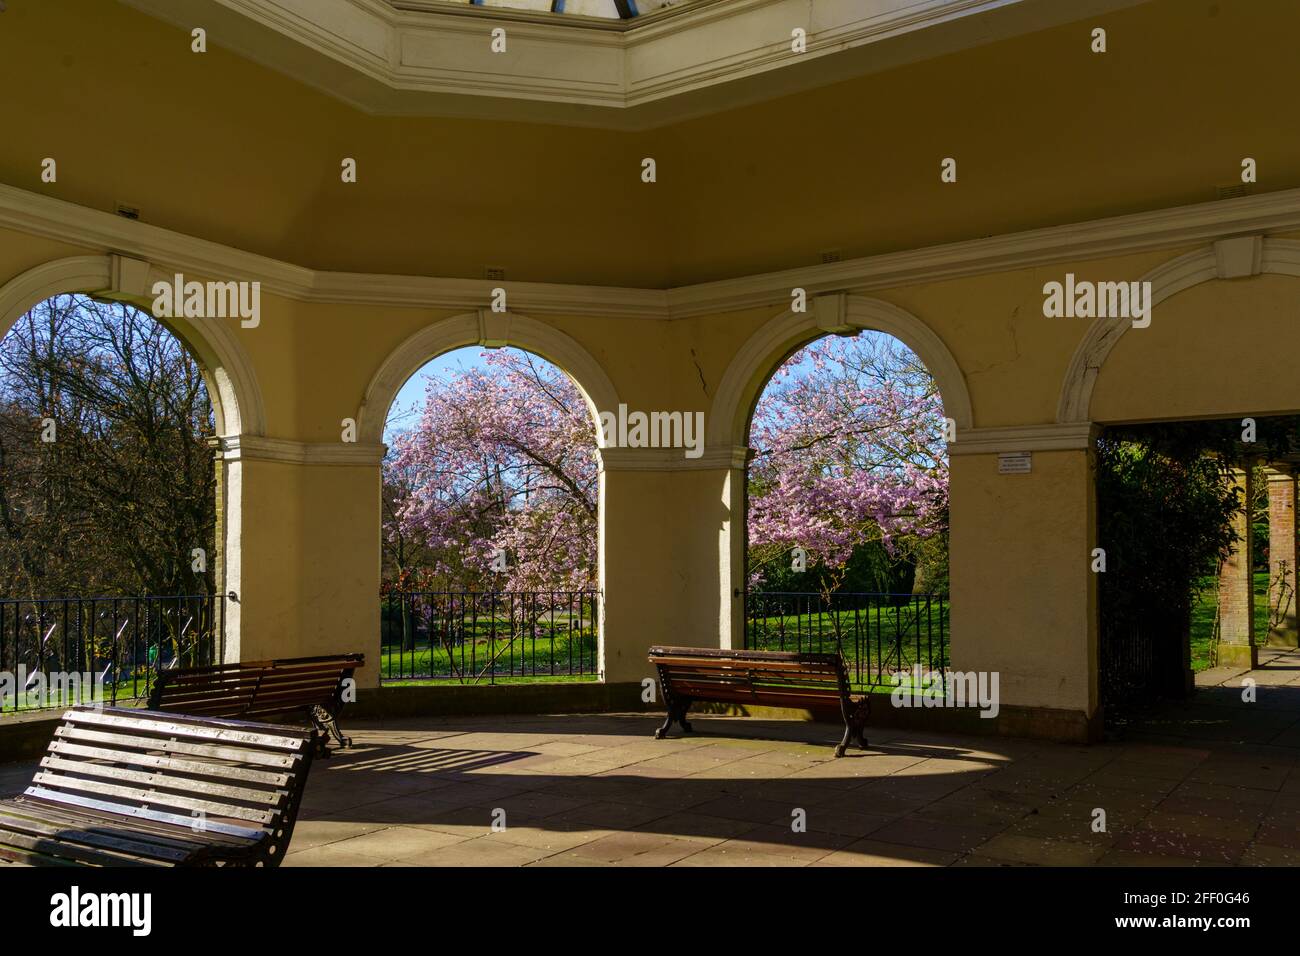 Pink Cherry Blossoms in Full Bloom in Valley Gardens, Harrogate, durch Two Arches of the Sun Pavilion Colonnade, North Yorkshire, England, Großbritannien. Stockfoto